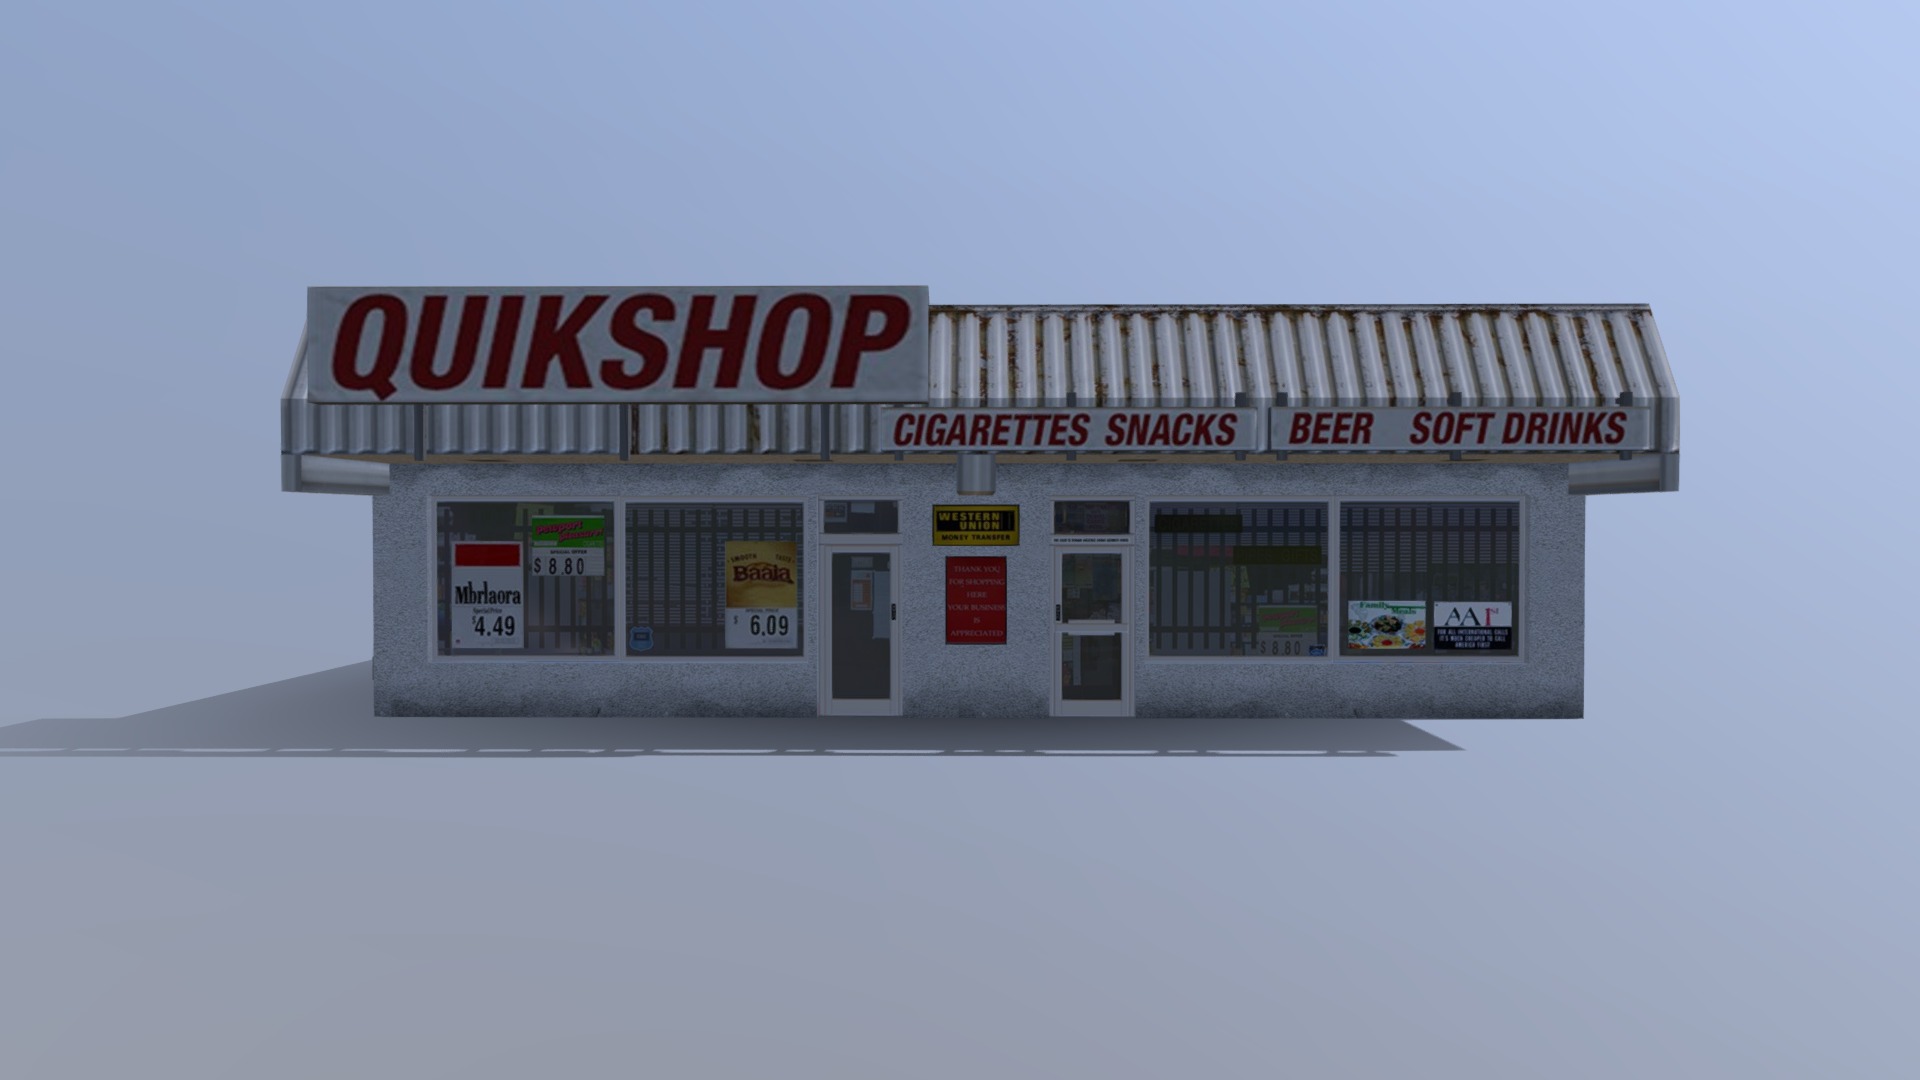 Typical North American strip mall building.

This was made as an asset for Cities:Skylines. Find it and other similar buildings here! - Strip Mall - Quikshop - 3D model by CommonSpence 3d model